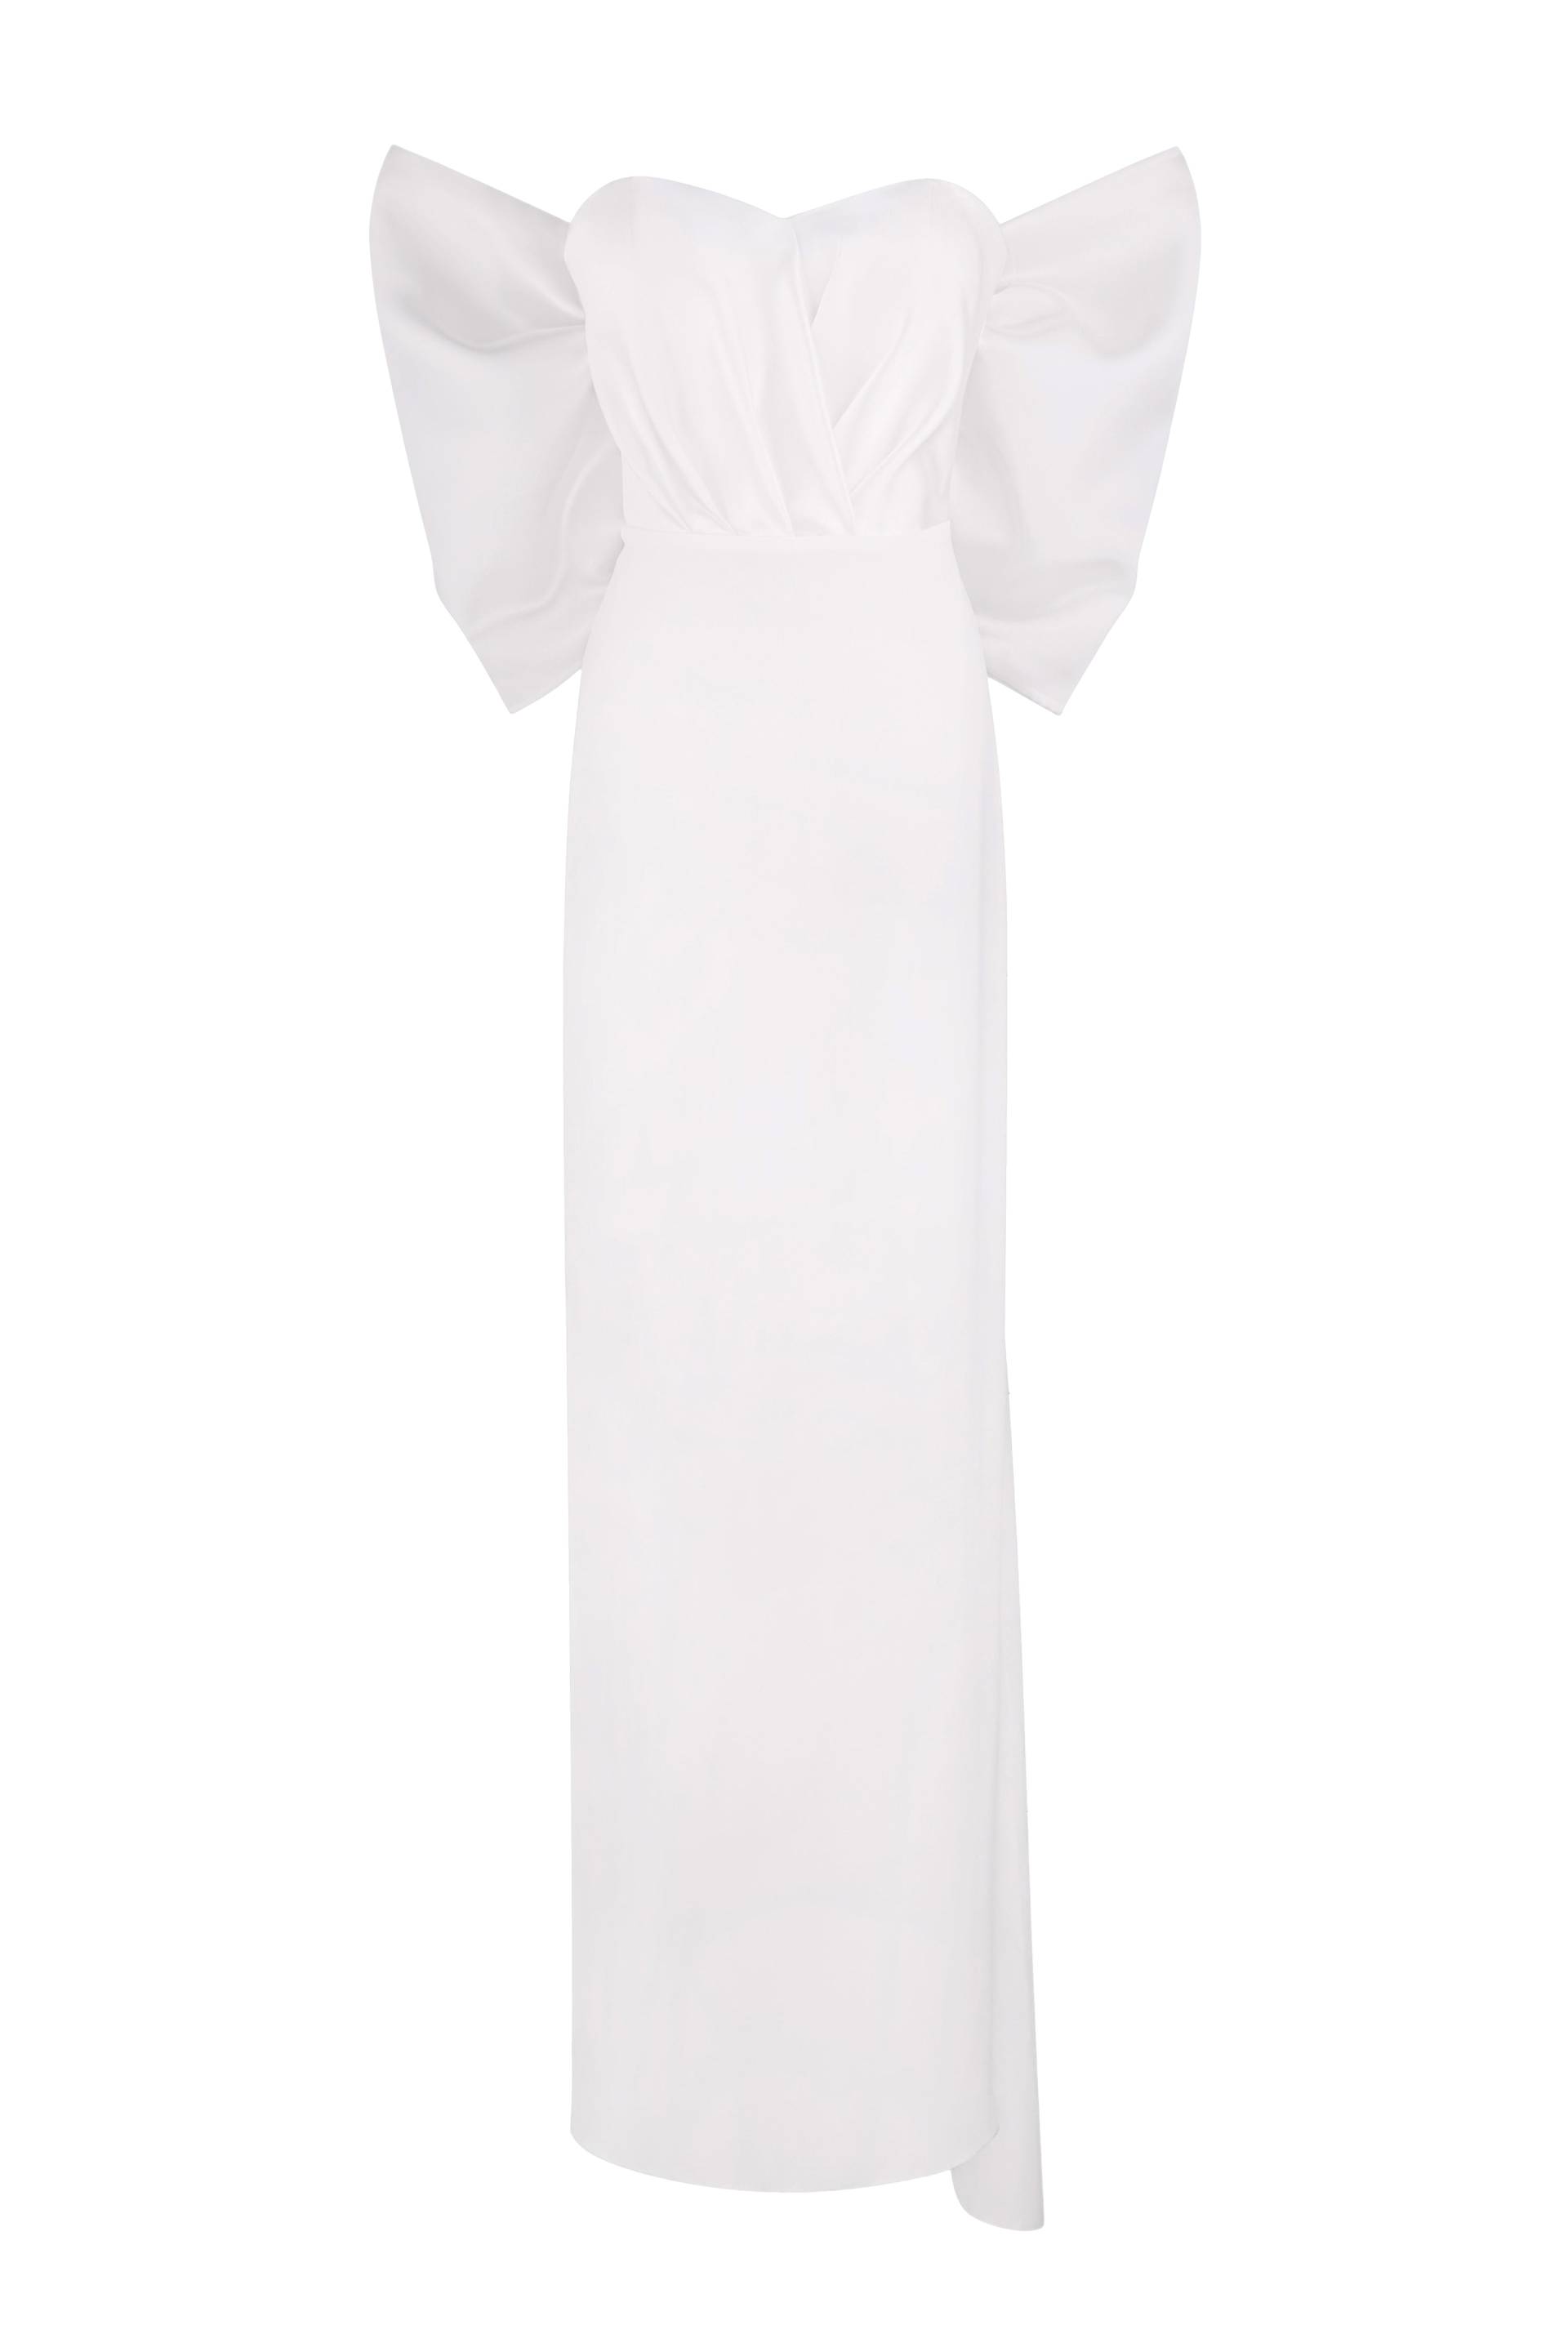 Dress with a featuring bow accent on the back von Total White